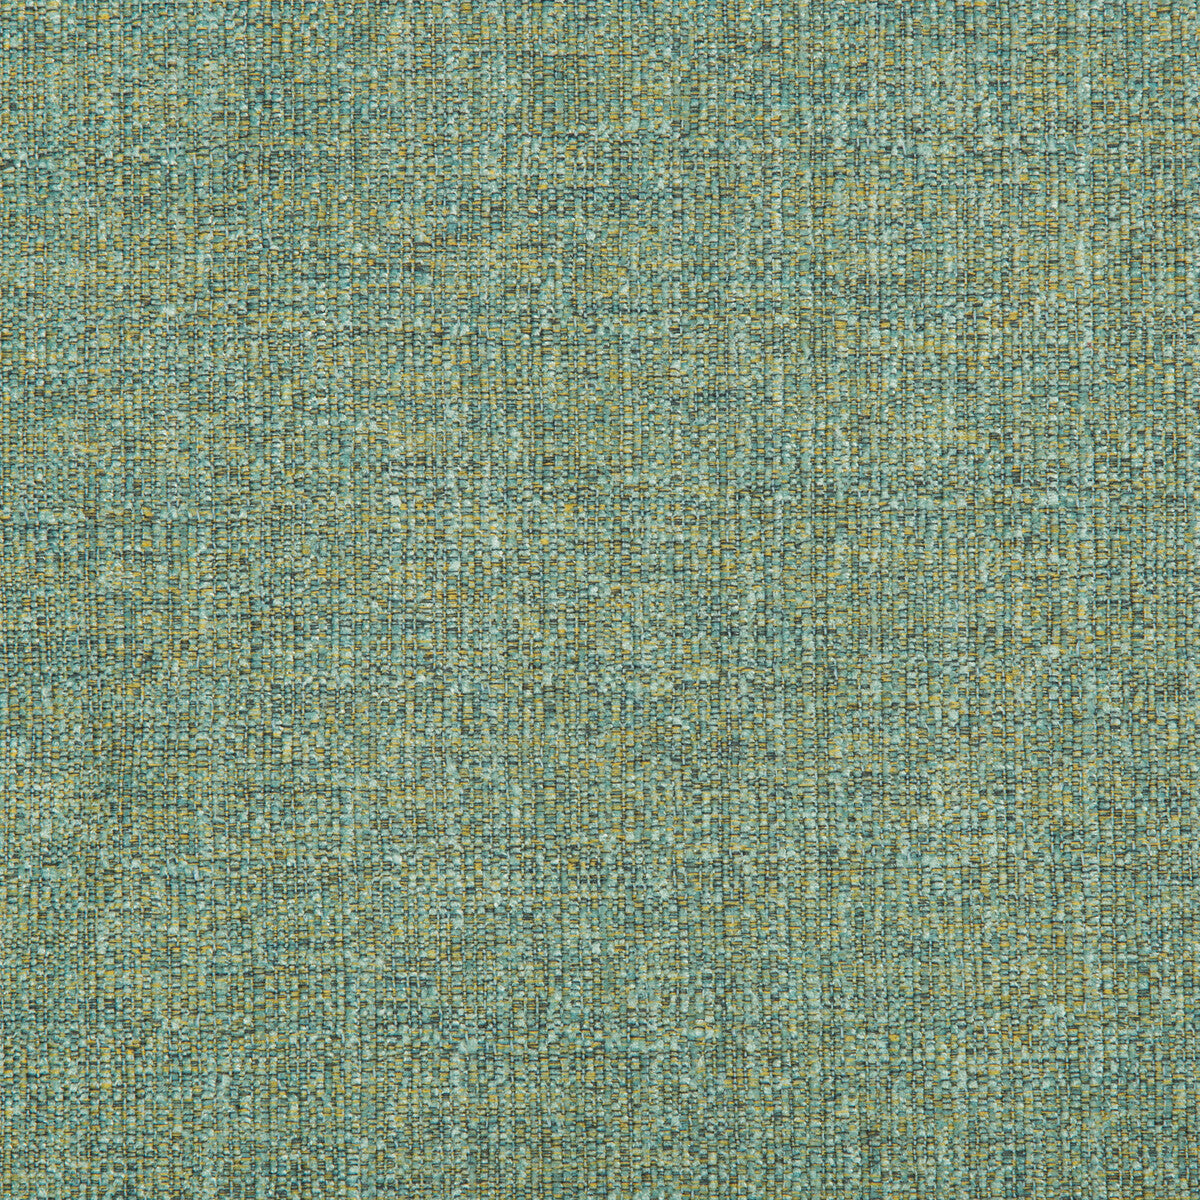 Kravet Contract fabric in 35479-423 color - pattern 35479.423.0 - by Kravet Contract